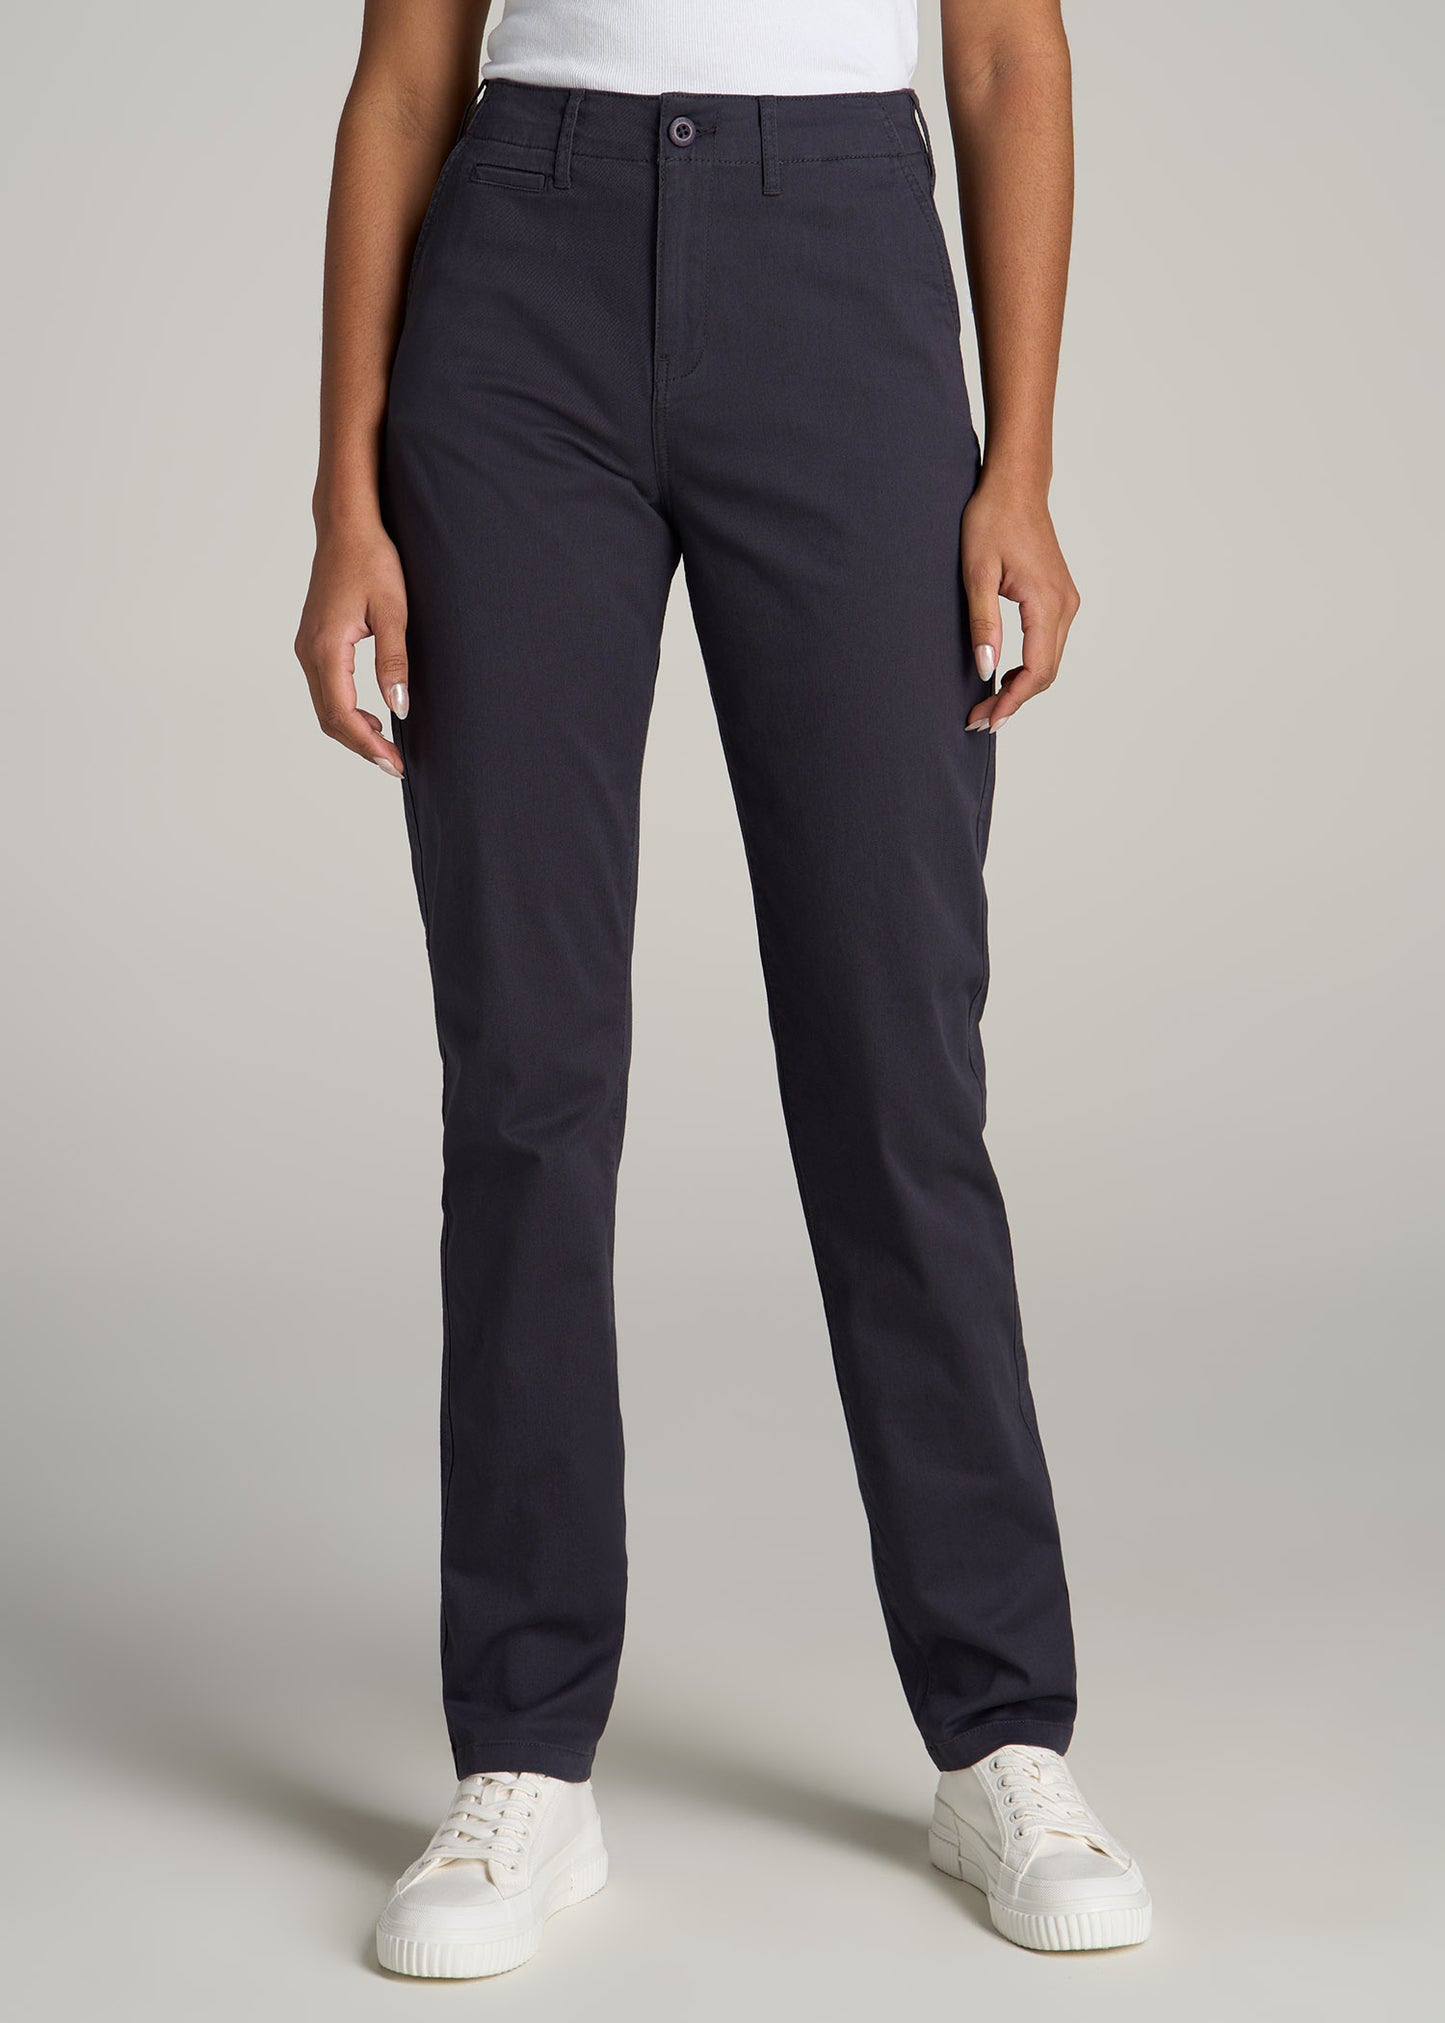 High Rise Tapered Chino Pants for Tall Women in Charcoal Rinse